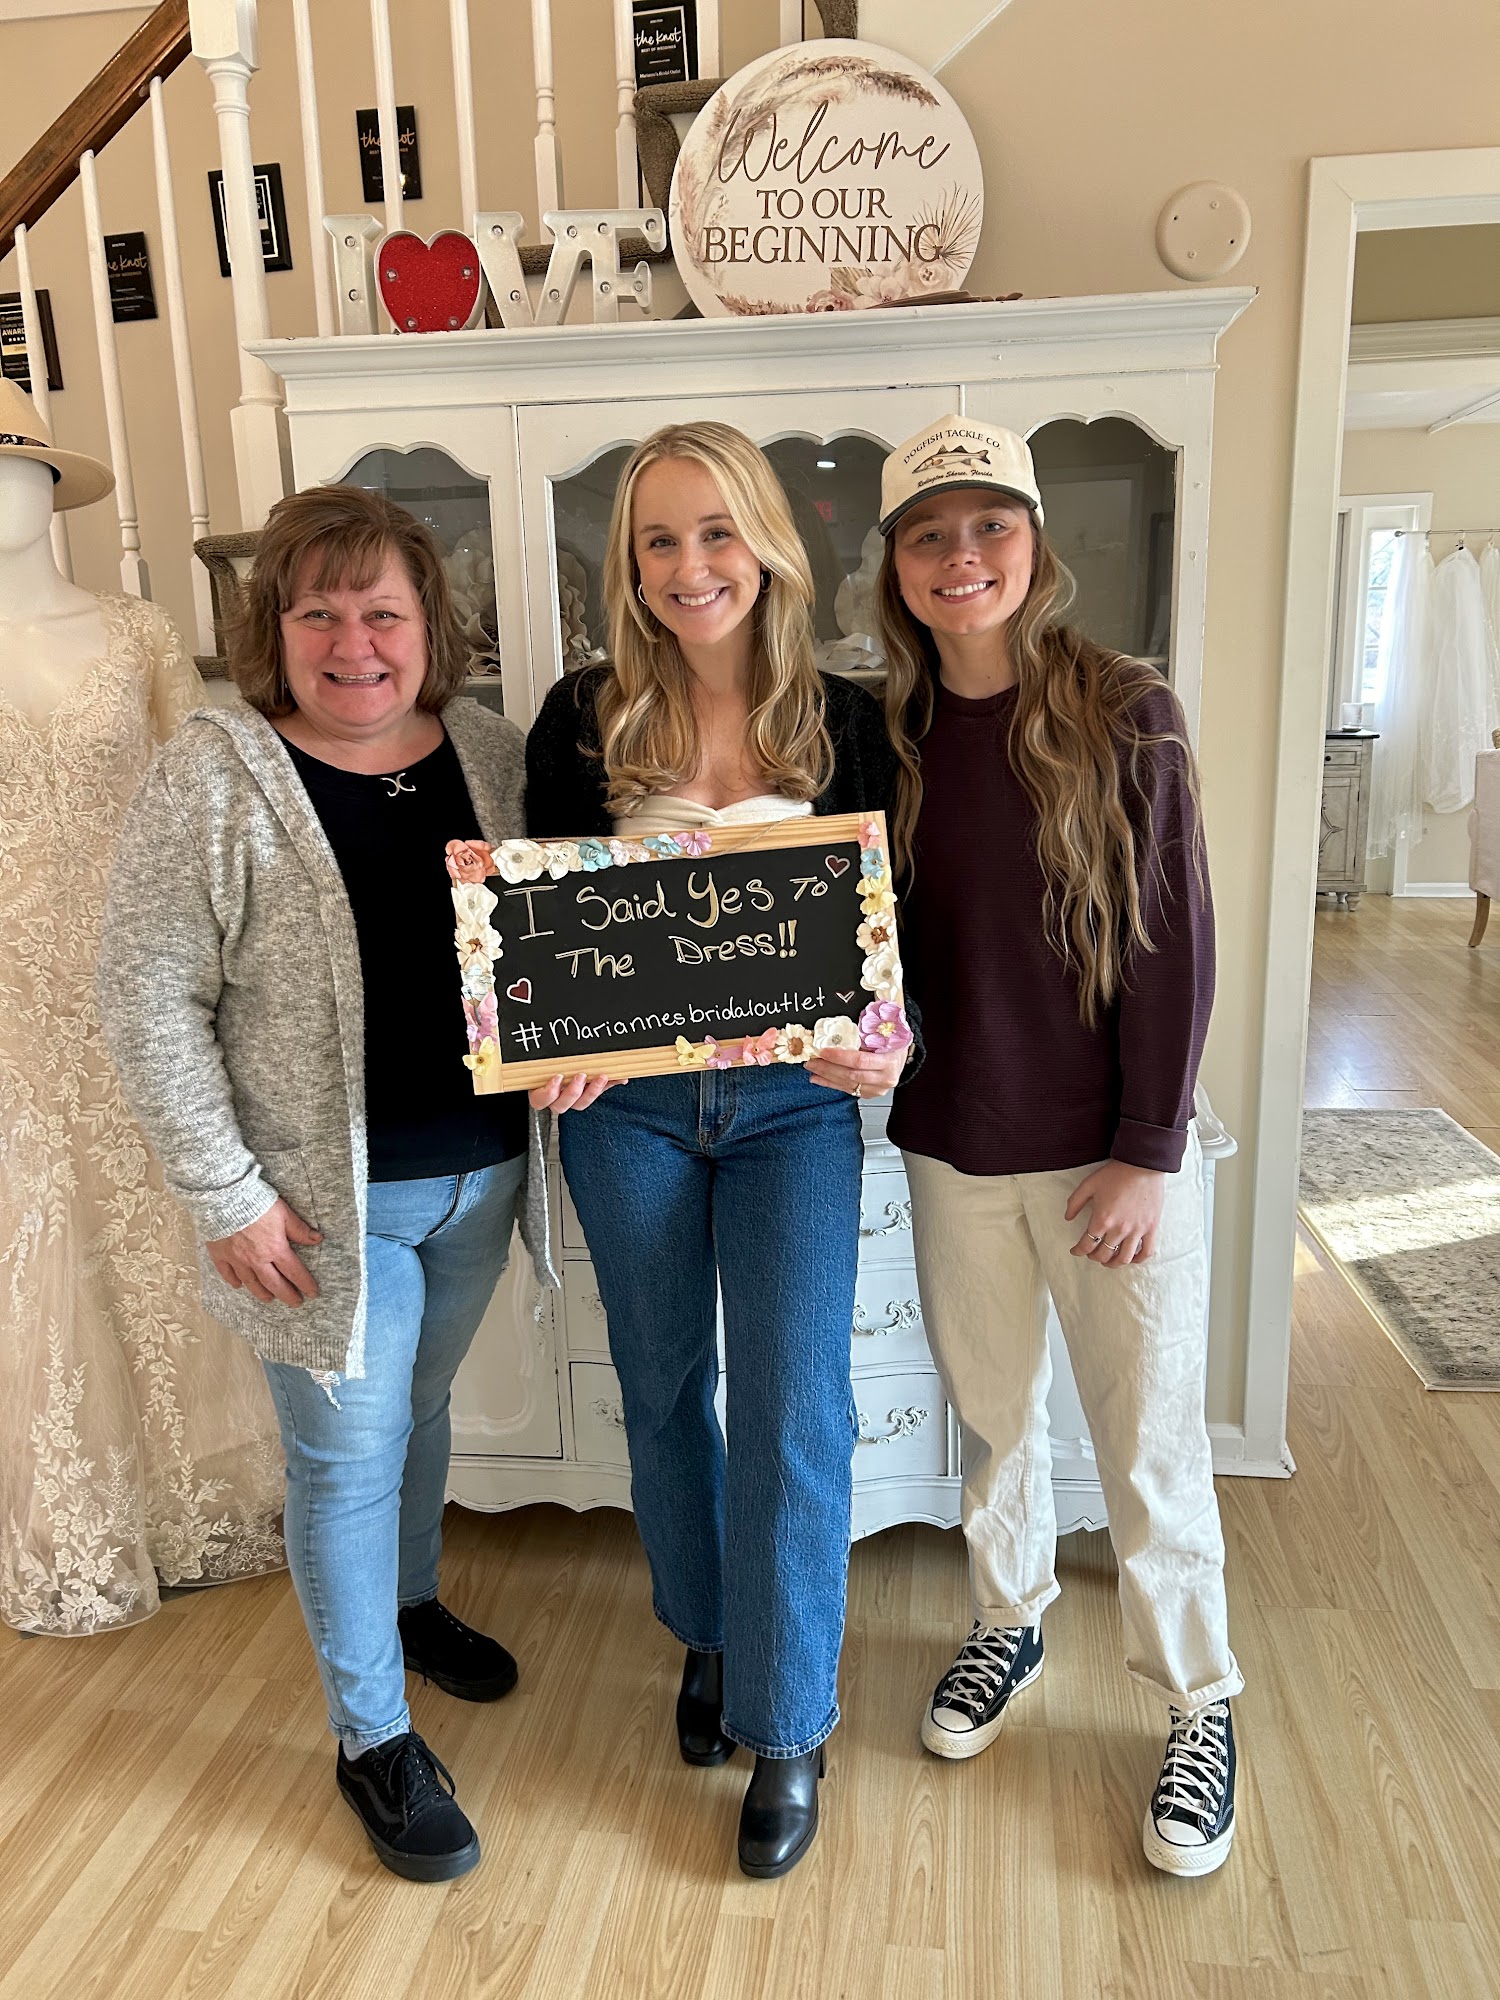 Marianne's Bridal Outlet